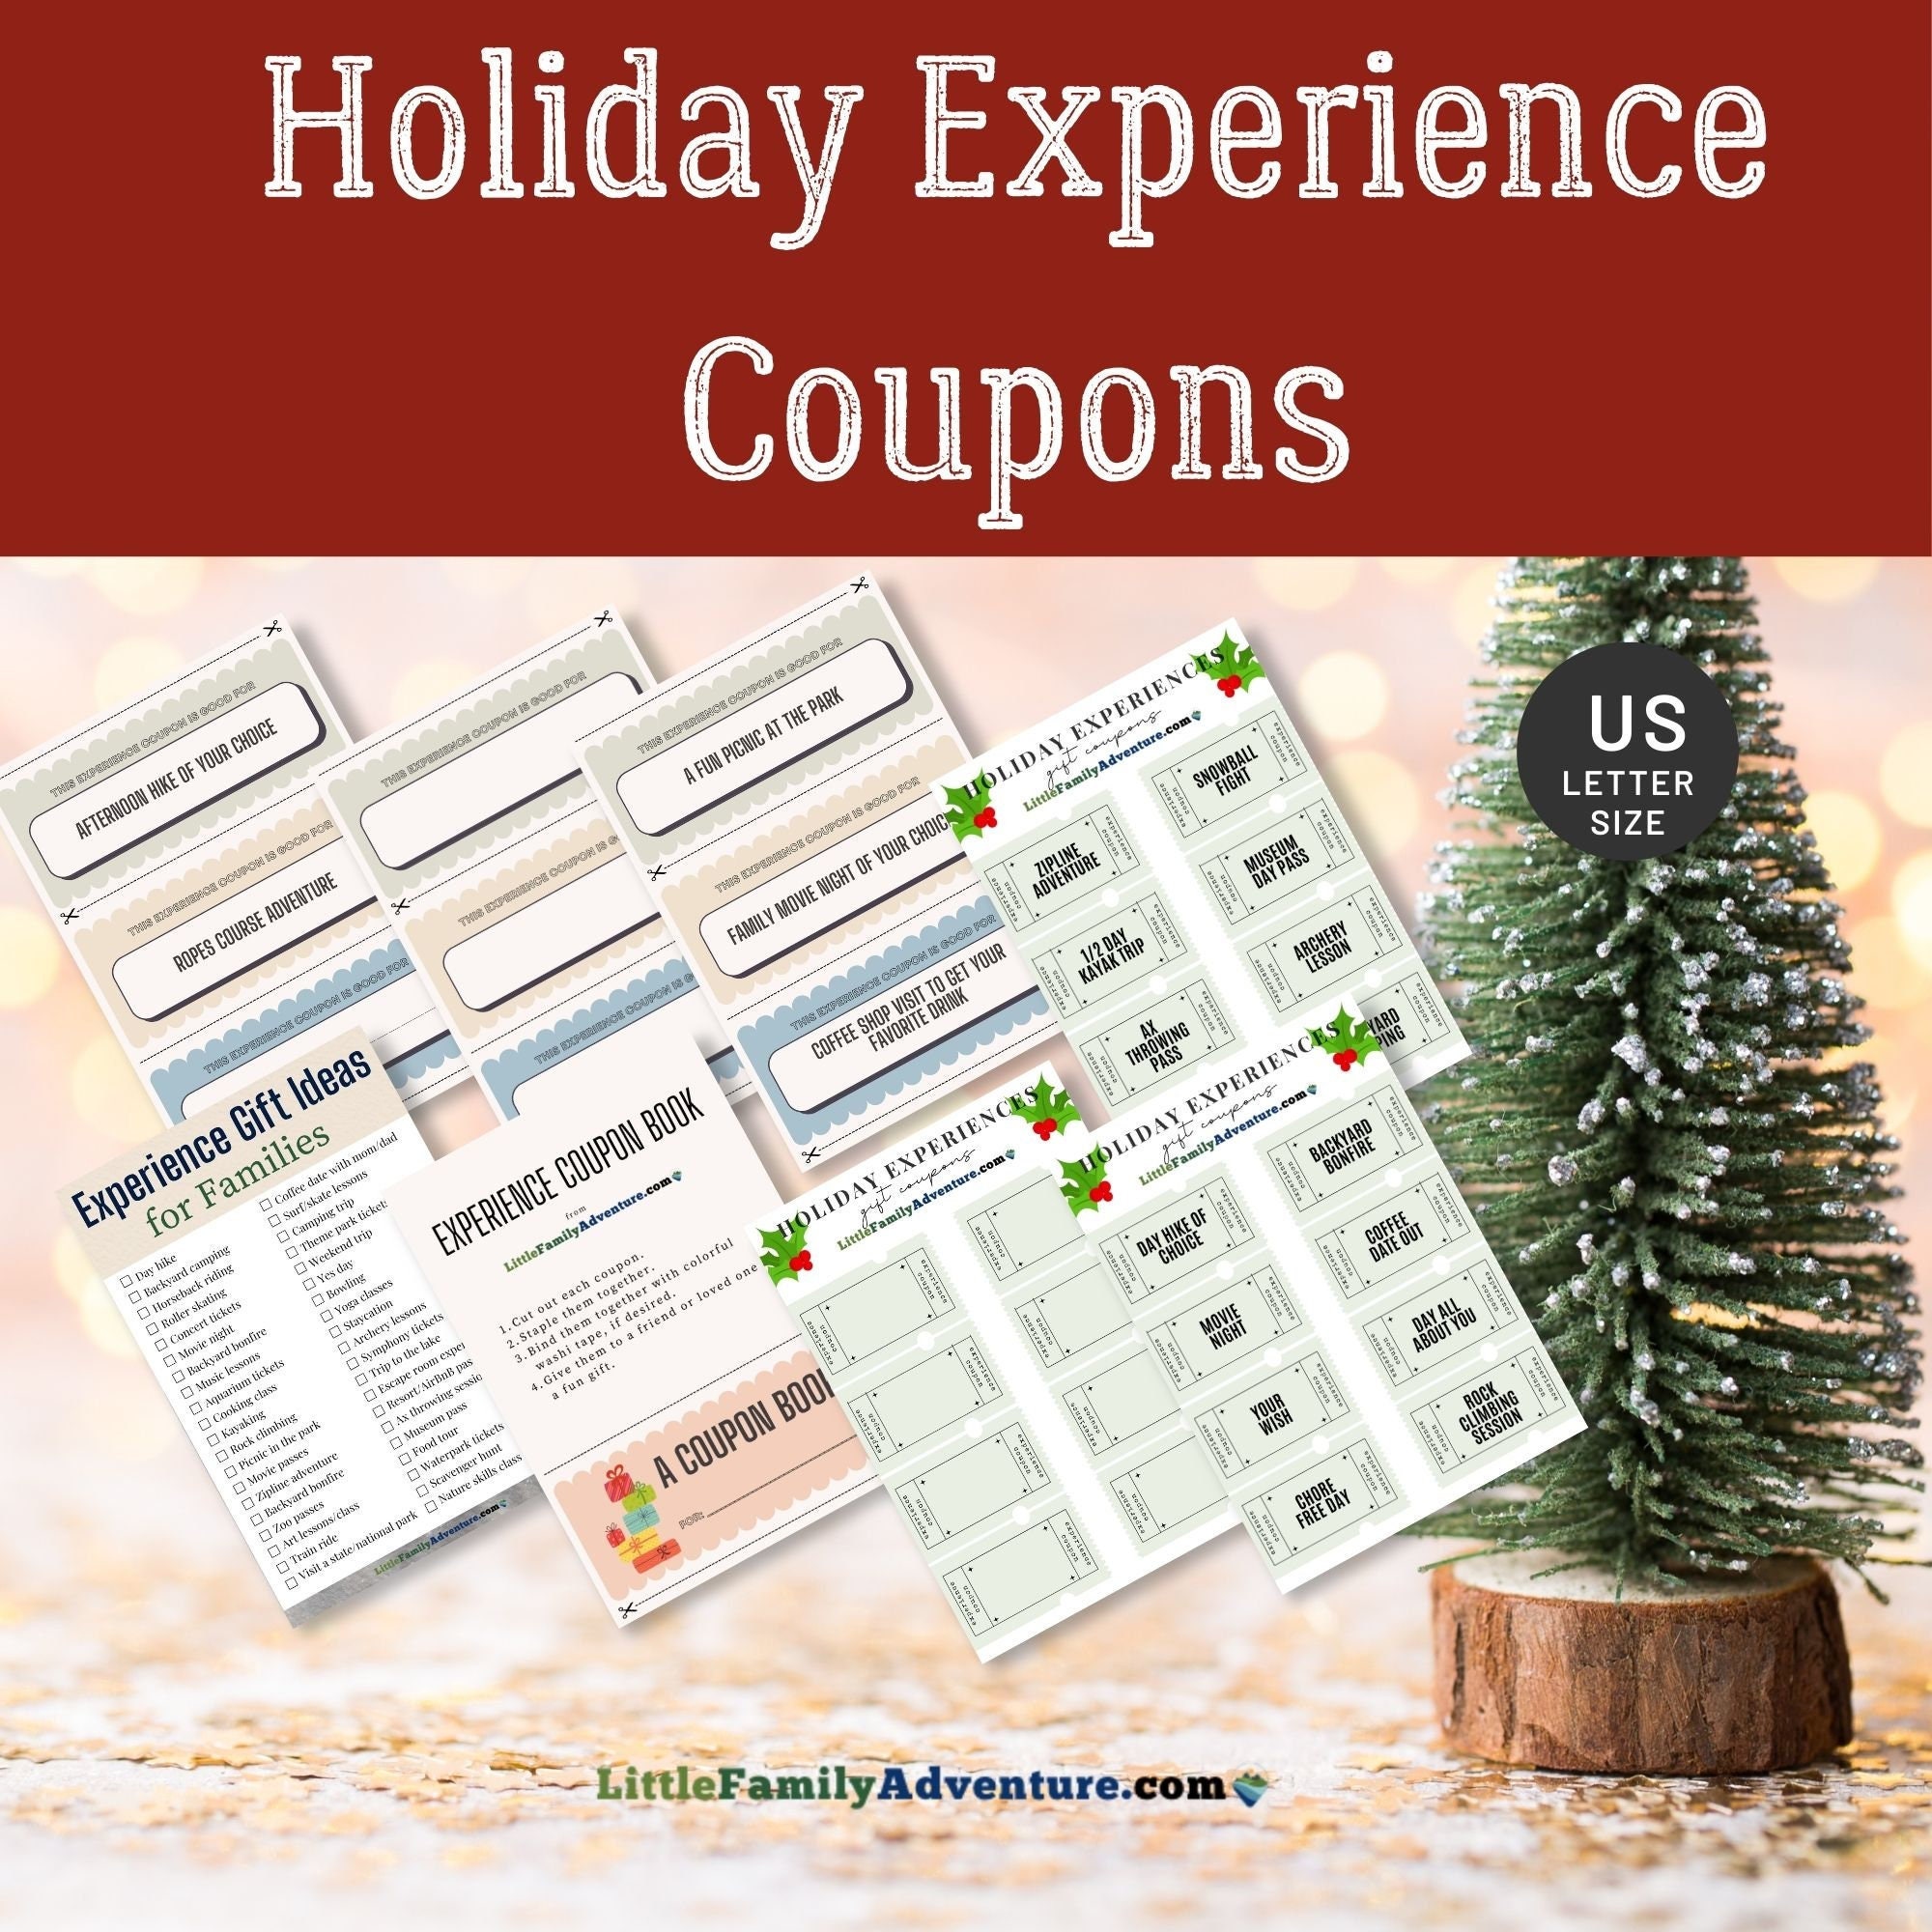 Holiday Experience Gift Coupons Gift Certificate Book Holiday